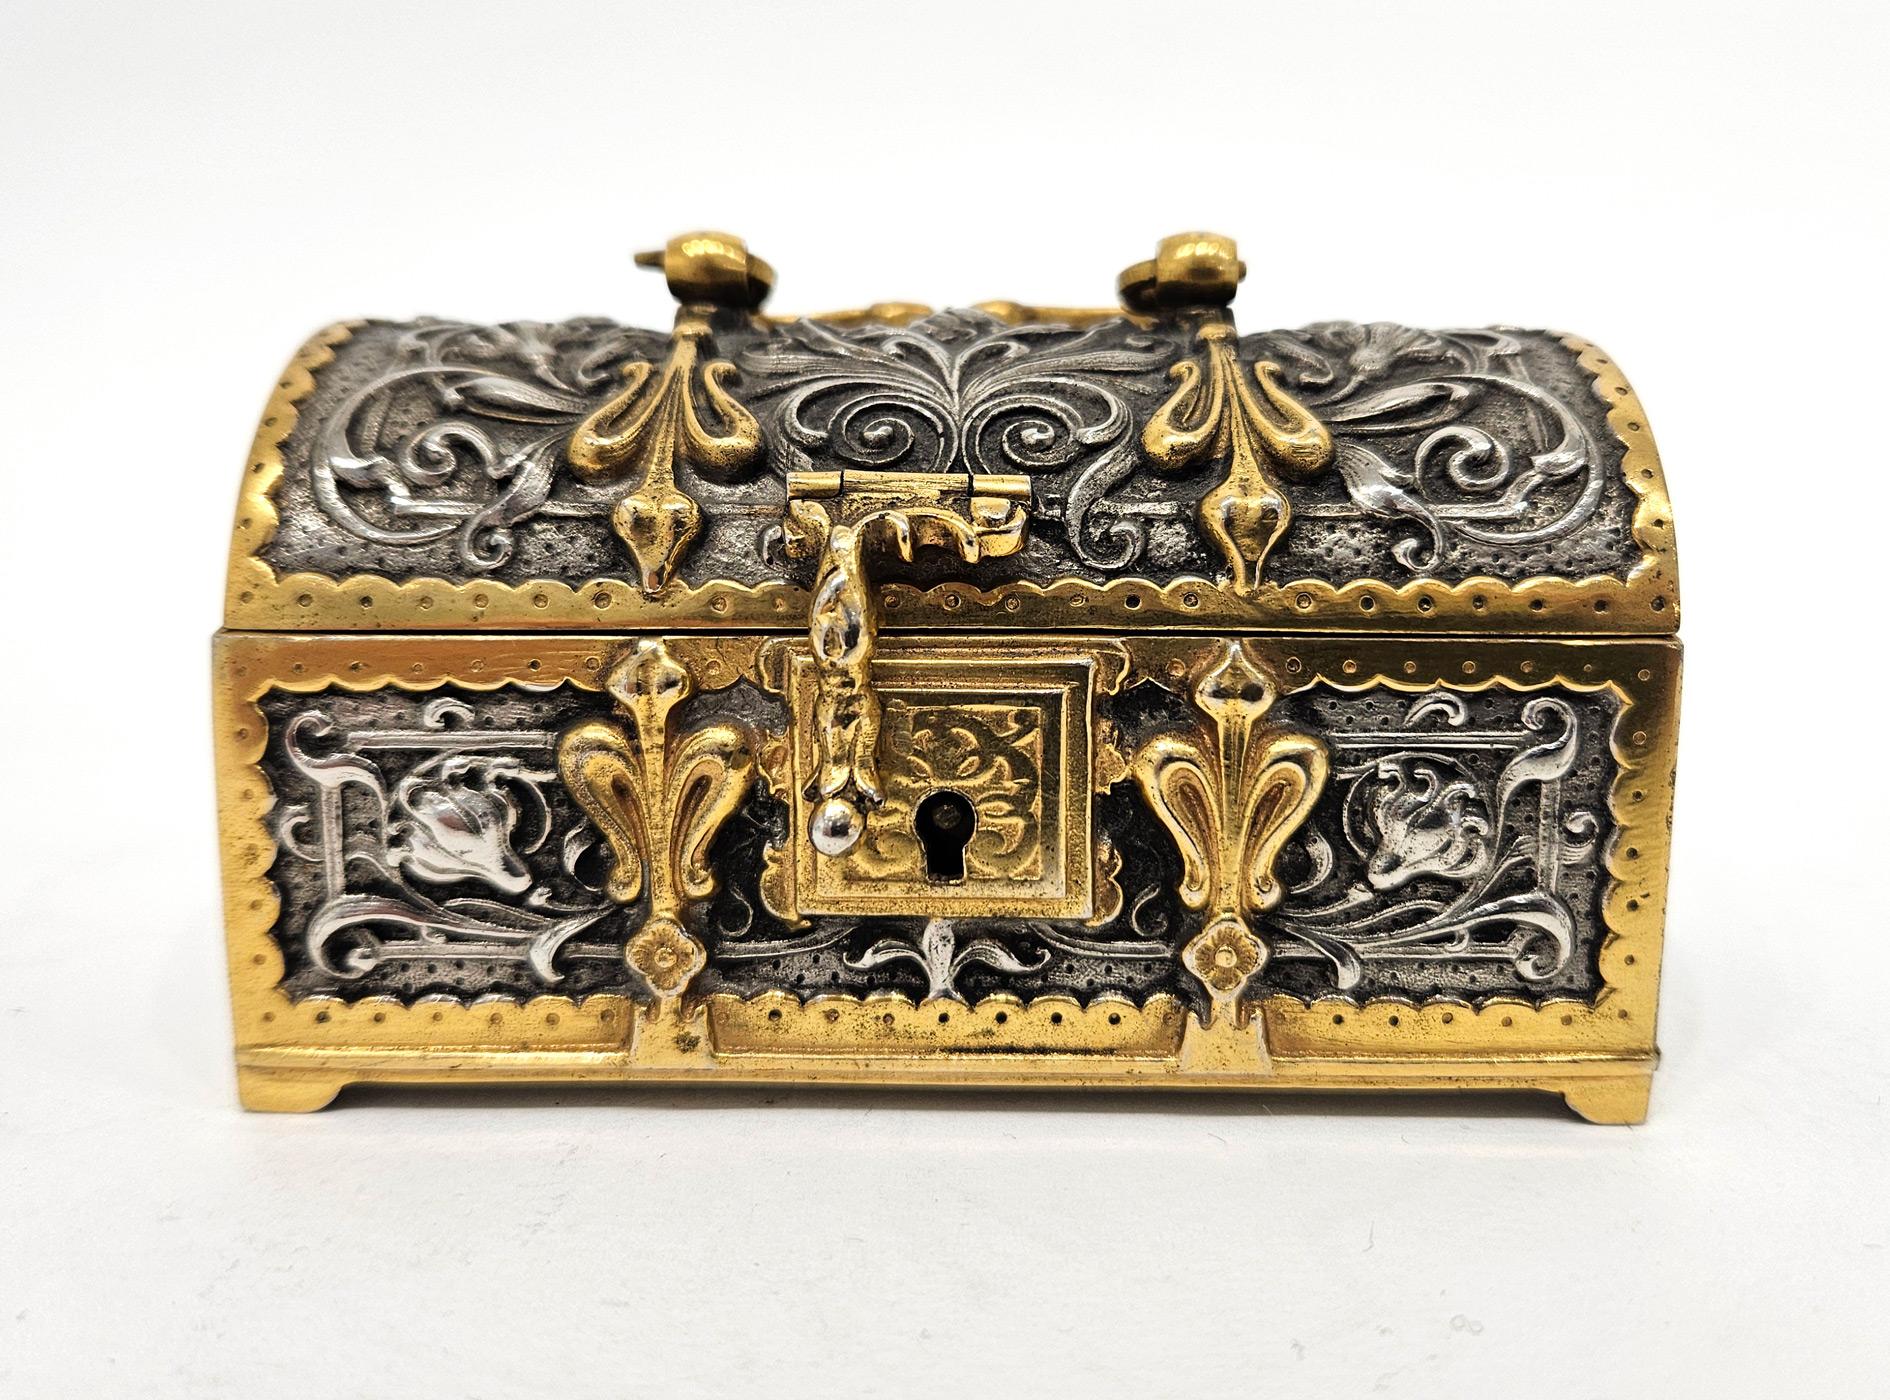 A beautiful art nouveau casket made by Erhard and Sohne in Germany in c. 1905. 

The casket is exquisitely executed with foliate detailing, made in the Gothic revival style in both polished and silvered brass and with a handle to the lid. It bears